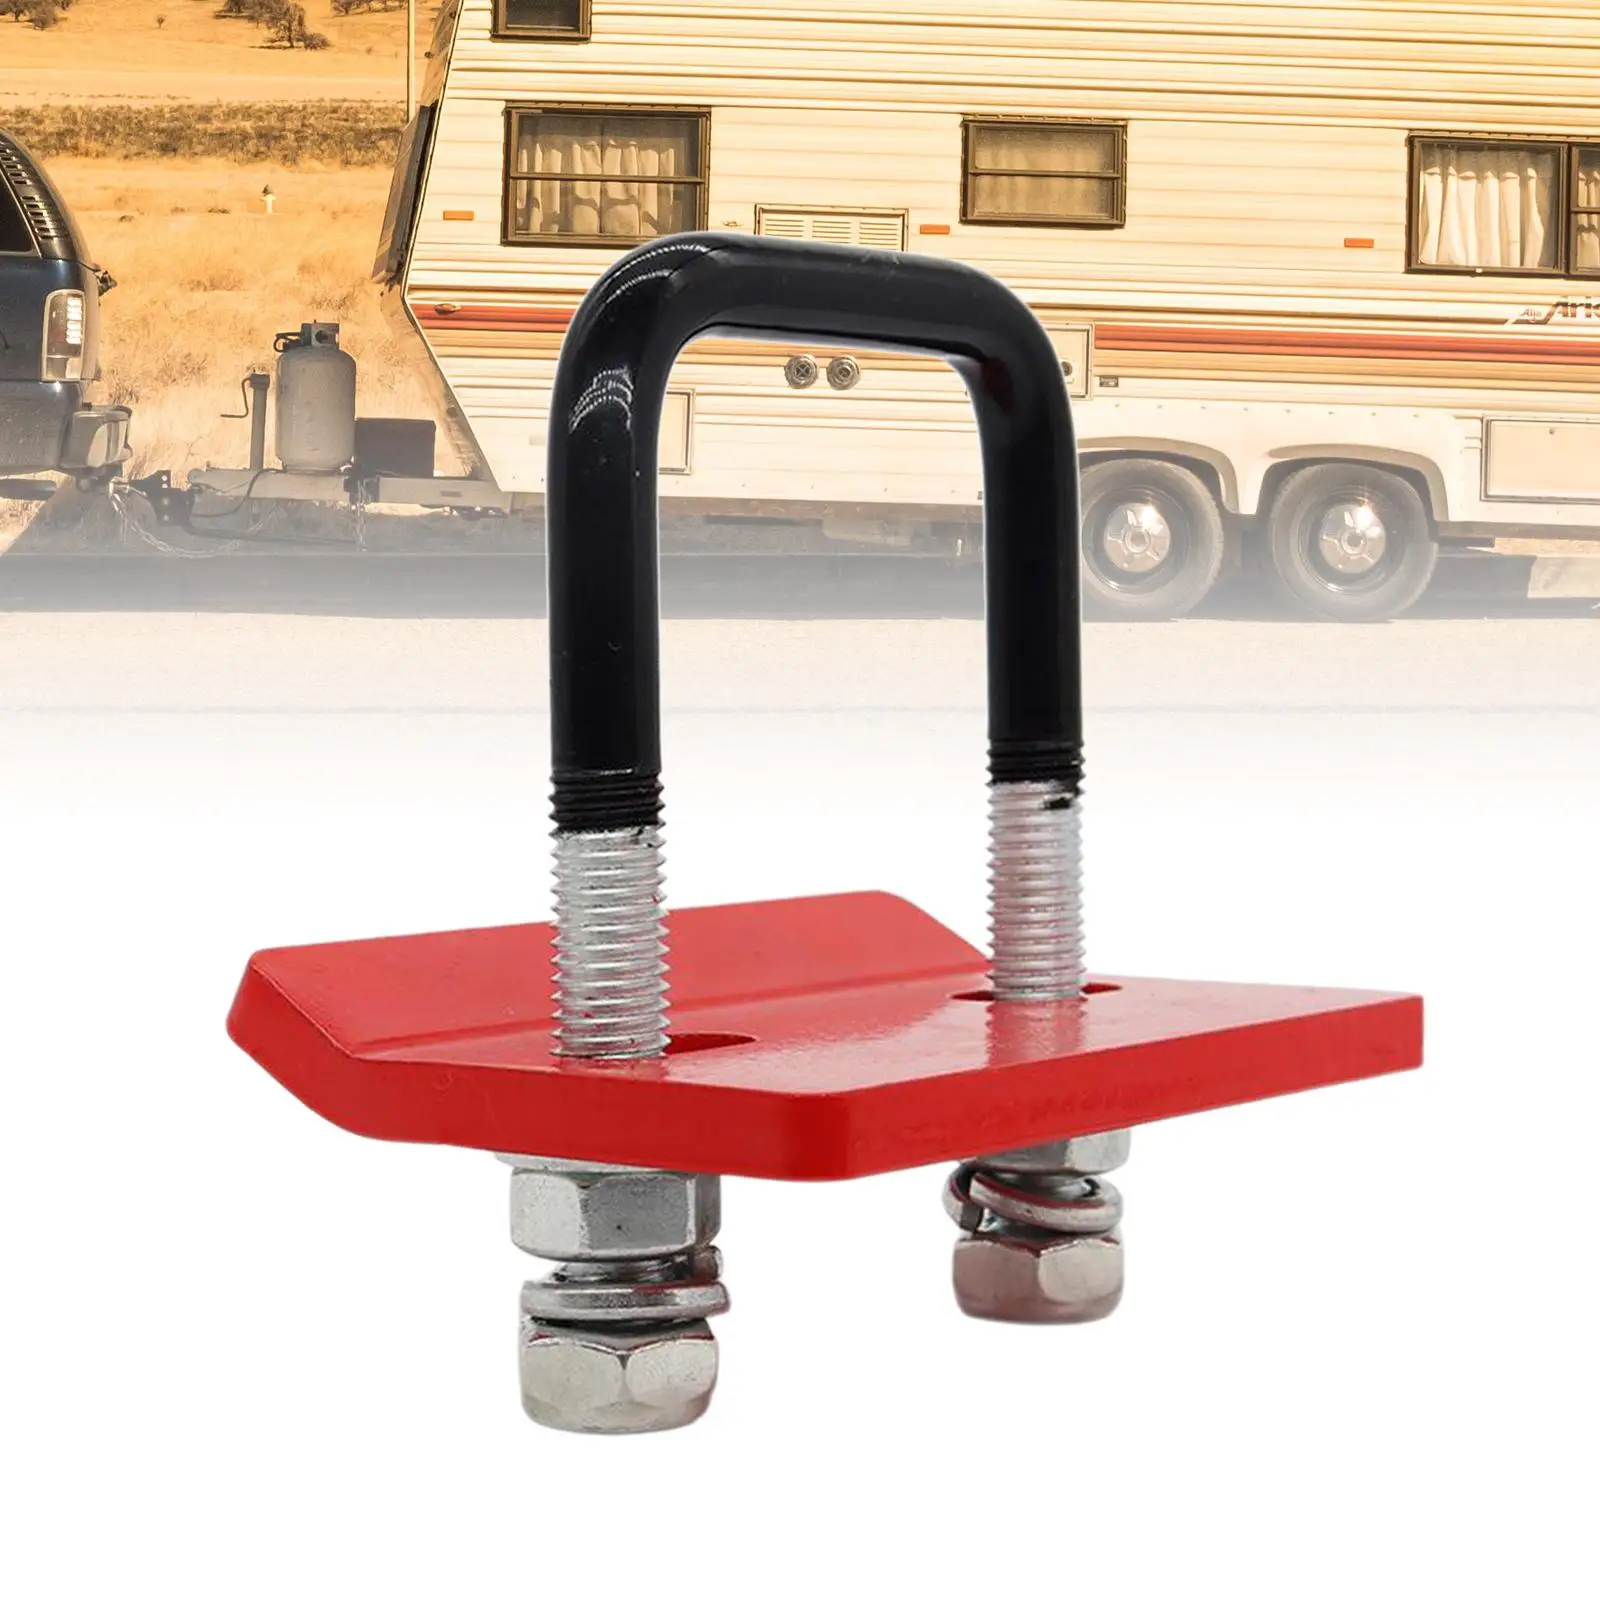 Alloy Steel Hitch Tightener Accessories Anti Rattle Stabilizer Lock Down Tow Clamp for Trailer Ball Mount Bike Rack Hitch Tray